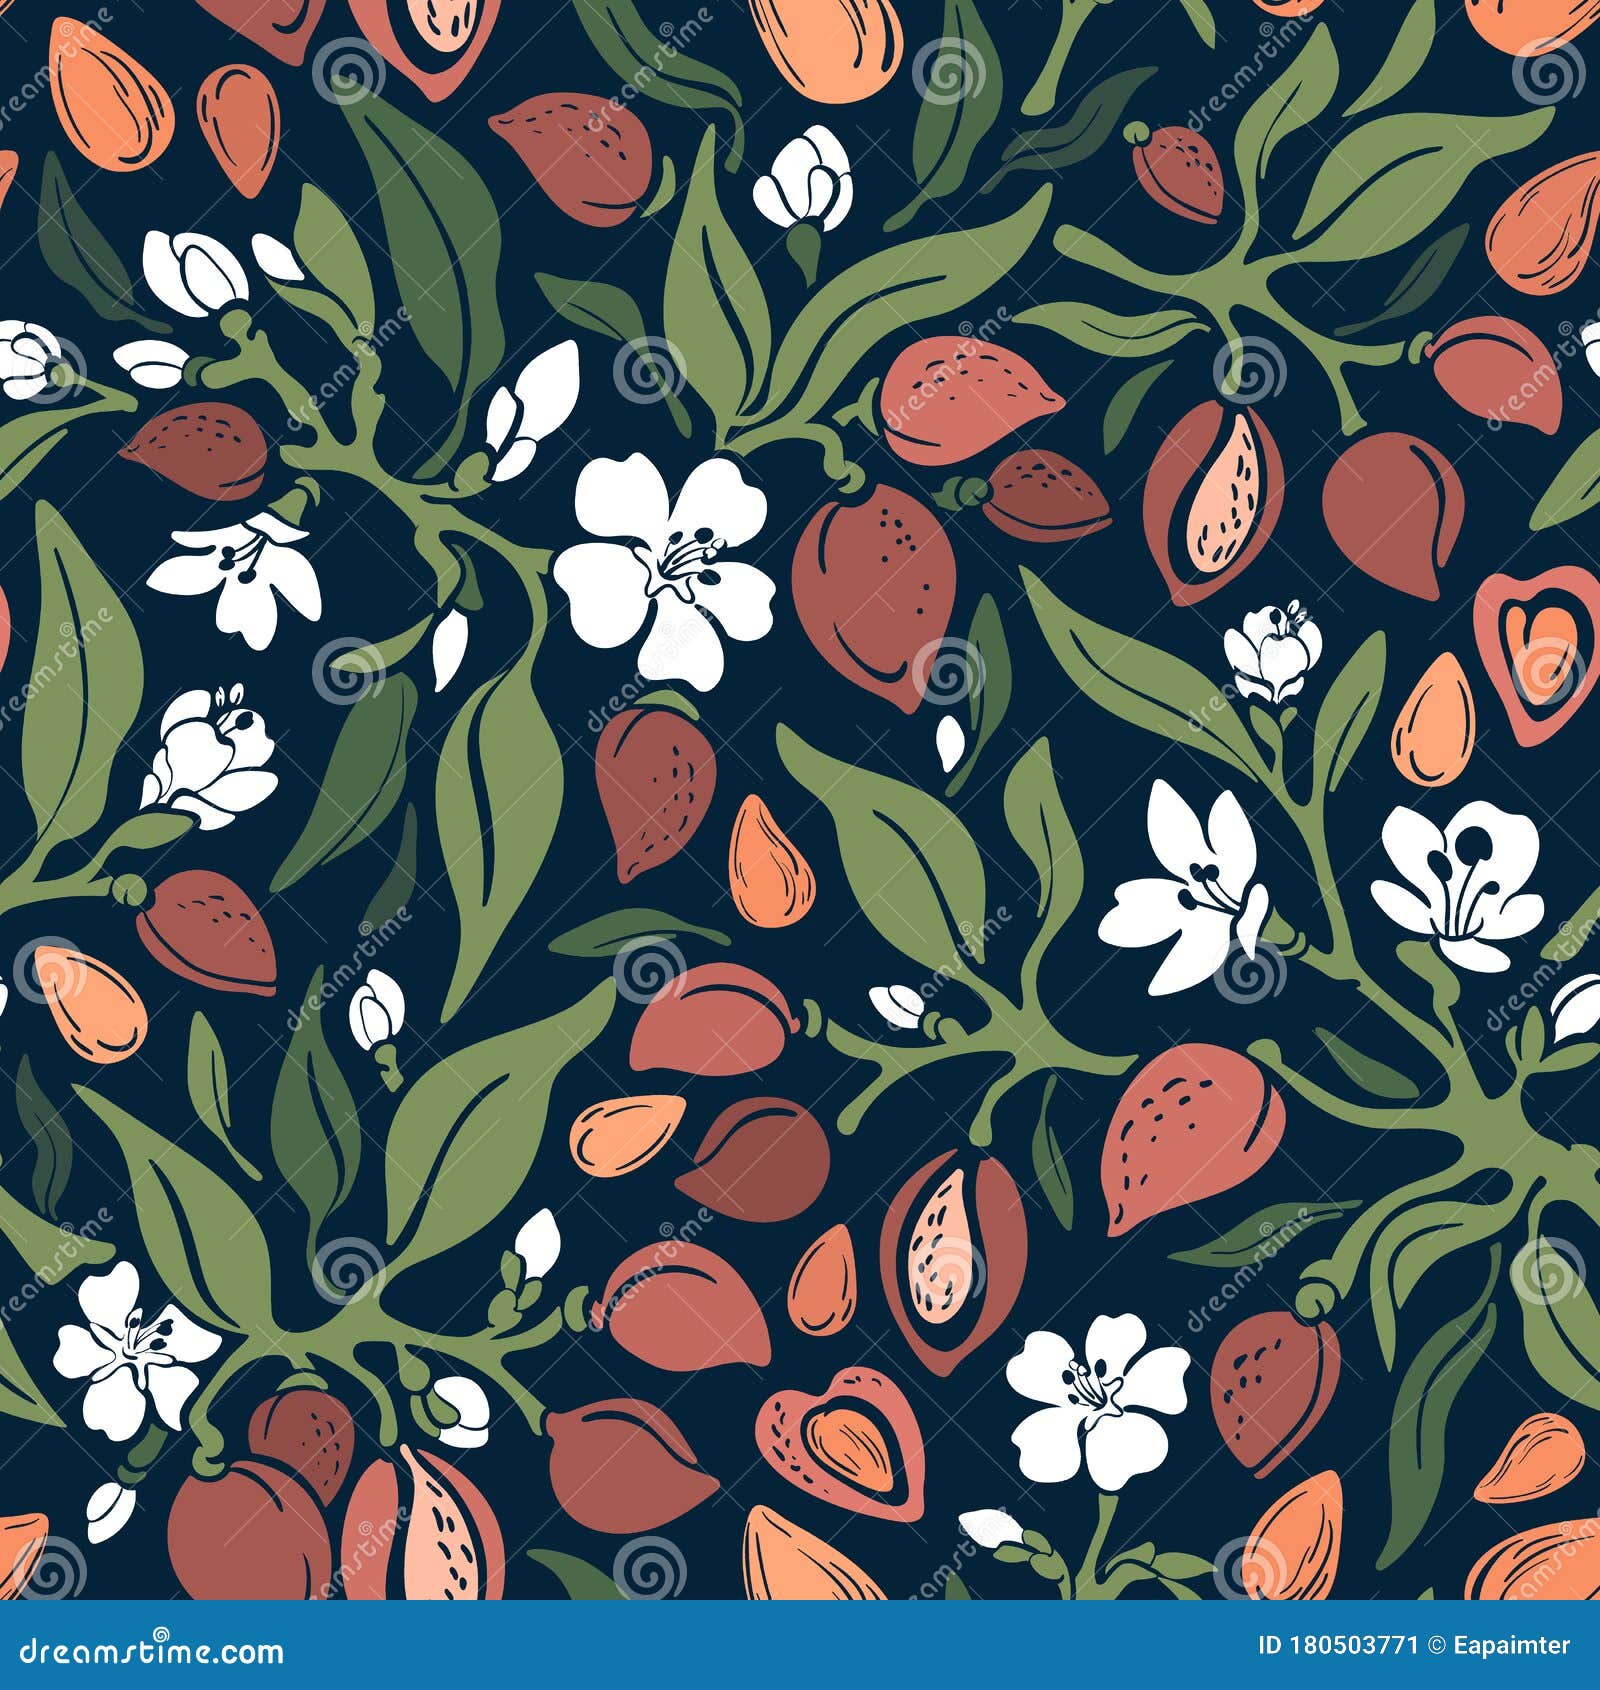 Vintage Almond Seamless Patterns and Elements Almond Branch Digital Paper Pack Floral Wallpaper Clip Art